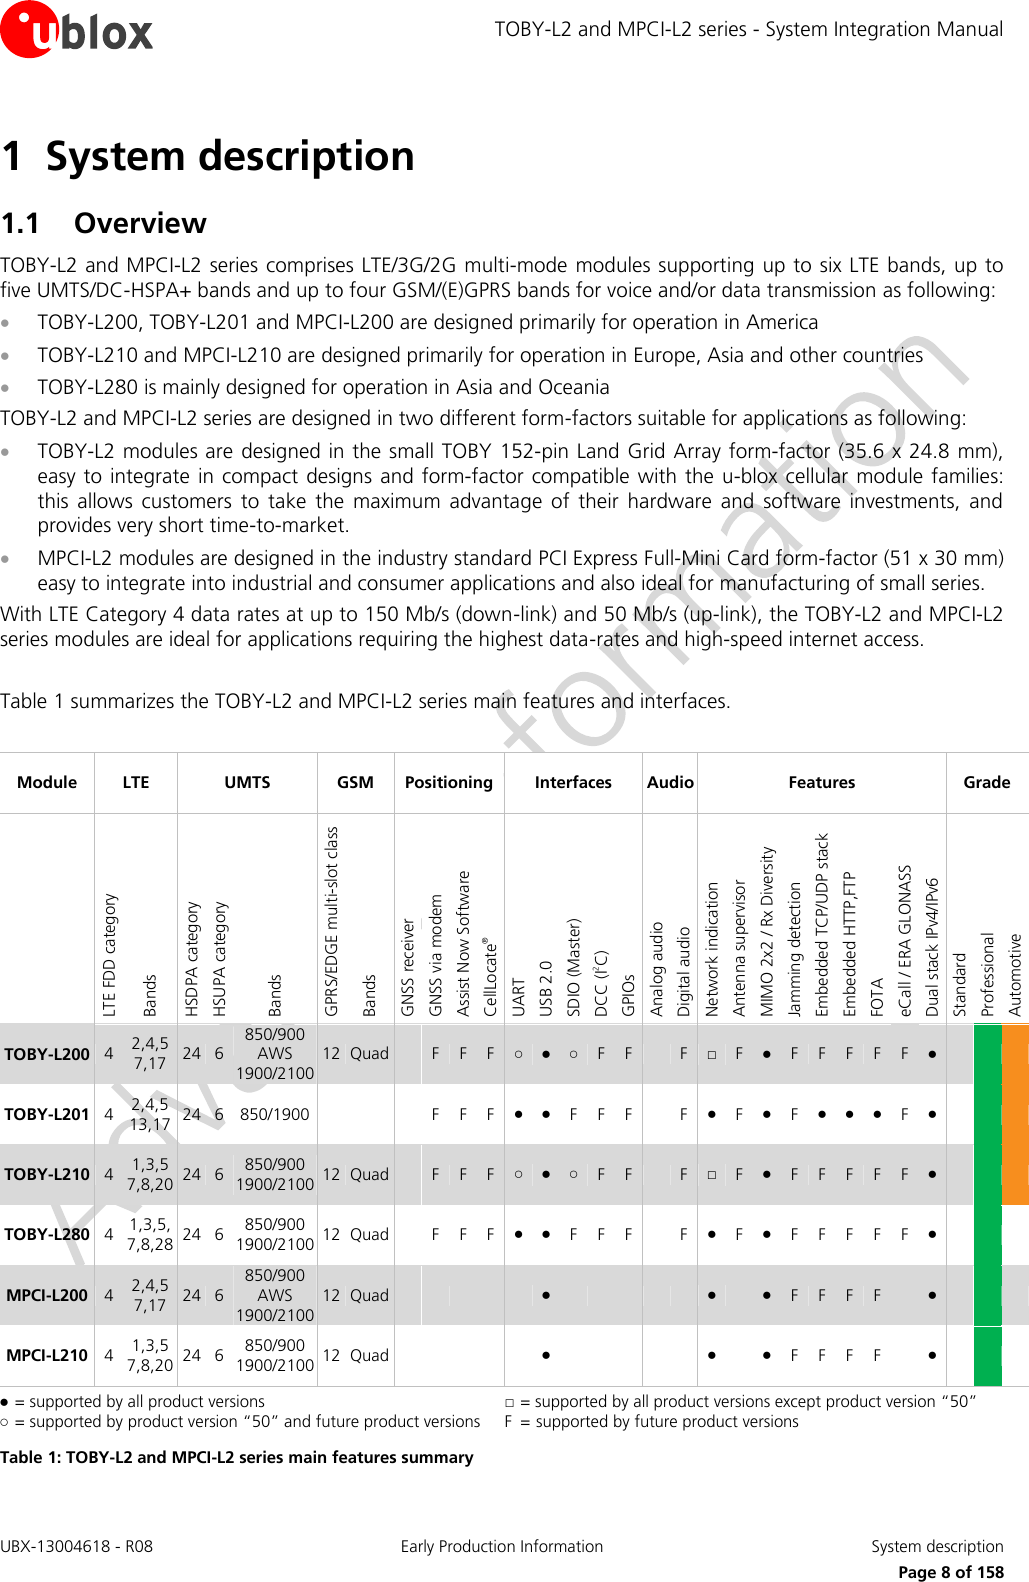 TOBY-L2 and MPCI-L2 series - System Integration Manual UBX-13004618 - R08  Early Production Information  System description     Page 8 of 158 1 System description 1.1 Overview TOBY-L2 and MPCI-L2  series comprises LTE/3G/2G multi-mode  modules supporting up to six LTE bands, up to five UMTS/DC-HSPA+ bands and up to four GSM/(E)GPRS bands for voice and/or data transmission as following:  TOBY-L200, TOBY-L201 and MPCI-L200 are designed primarily for operation in America  TOBY-L210 and MPCI-L210 are designed primarily for operation in Europe, Asia and other countries  TOBY-L280 is mainly designed for operation in Asia and Oceania TOBY-L2 and MPCI-L2 series are designed in two different form-factors suitable for applications as following:  TOBY-L2 modules are designed in the small TOBY  152-pin Land Grid Array form-factor (35.6 x 24.8  mm), easy to integrate in compact  designs and  form-factor compatible with the  u-blox cellular  module  families: this  allows  customers  to  take  the  maximum  advantage  of  their  hardware  and  software  investments,  and provides very short time-to-market.  MPCI-L2 modules are designed in the industry standard PCI Express Full-Mini Card form-factor (51 x 30 mm) easy to integrate into industrial and consumer applications and also ideal for manufacturing of small series. With LTE Category 4 data rates at up to 150 Mb/s (down-link) and 50 Mb/s (up-link), the TOBY-L2 and MPCI-L2 series modules are ideal for applications requiring the highest data-rates and high-speed internet access.   Table 1 summarizes the TOBY-L2 and MPCI-L2 series main features and interfaces.  Module LTE UMTS GSM Positioning Interfaces Audio Features Grade  LTE FDD category Bands HSDPA category HSUPA category Bands GPRS/EDGE multi-slot class Bands GNSS receiver GNSS via modem Assist Now Software CellLocate® UART USB 2.0 SDIO (Master) DCC (I2C) GPIOs Analog audio Digital audio  Network indication Antenna supervisor MIMO 2x2 / Rx Diversity Jamming detection Embedded TCP/UDP stack Embedded HTTP,FTP FOTA eCall / ERA GLONASS Dual stack IPv4/IPv6 Standard Professional Automotive TOBY-L200 4 2,4,5 7,17 24 6 850/900 AWS 1900/2100 12 Quad  F F F ○ ● ○ F F  F □ F ● F F F F F ●    TOBY-L201 4 2,4,5 13,17  24 6 850/1900    F F F ● ● F F F  F ● F ● F ● ● ● F ●    TOBY-L210 4 1,3,5 7,8,20 24 6 850/900 1900/2100 12 Quad  F F F ○ ● ○ F F  F □ F ● F F F F F ●    TOBY-L280 4 1,3,5, 7,8,28 24 6 850/900 1900/2100 12 Quad  F F F ● ● F F F  F ● F ● F F F F F ●    MPCI-L200 4 2,4,5 7,17 24 6 850/900 AWS 1900/2100 12 Quad      ●      ●  ● F F F F  ●    MPCI-L210 4 1,3,5 7,8,20 24 6 850/900 1900/2100 12 Quad      ●      ●  ● F F F F  ●    ●  = supported by all product versions  ○  = supported by product version “50” and future product versions □  = supported by all product versions except product version “50”  F  =  supported by future product versions Table 1: TOBY-L2 and MPCI-L2 series main features summary 